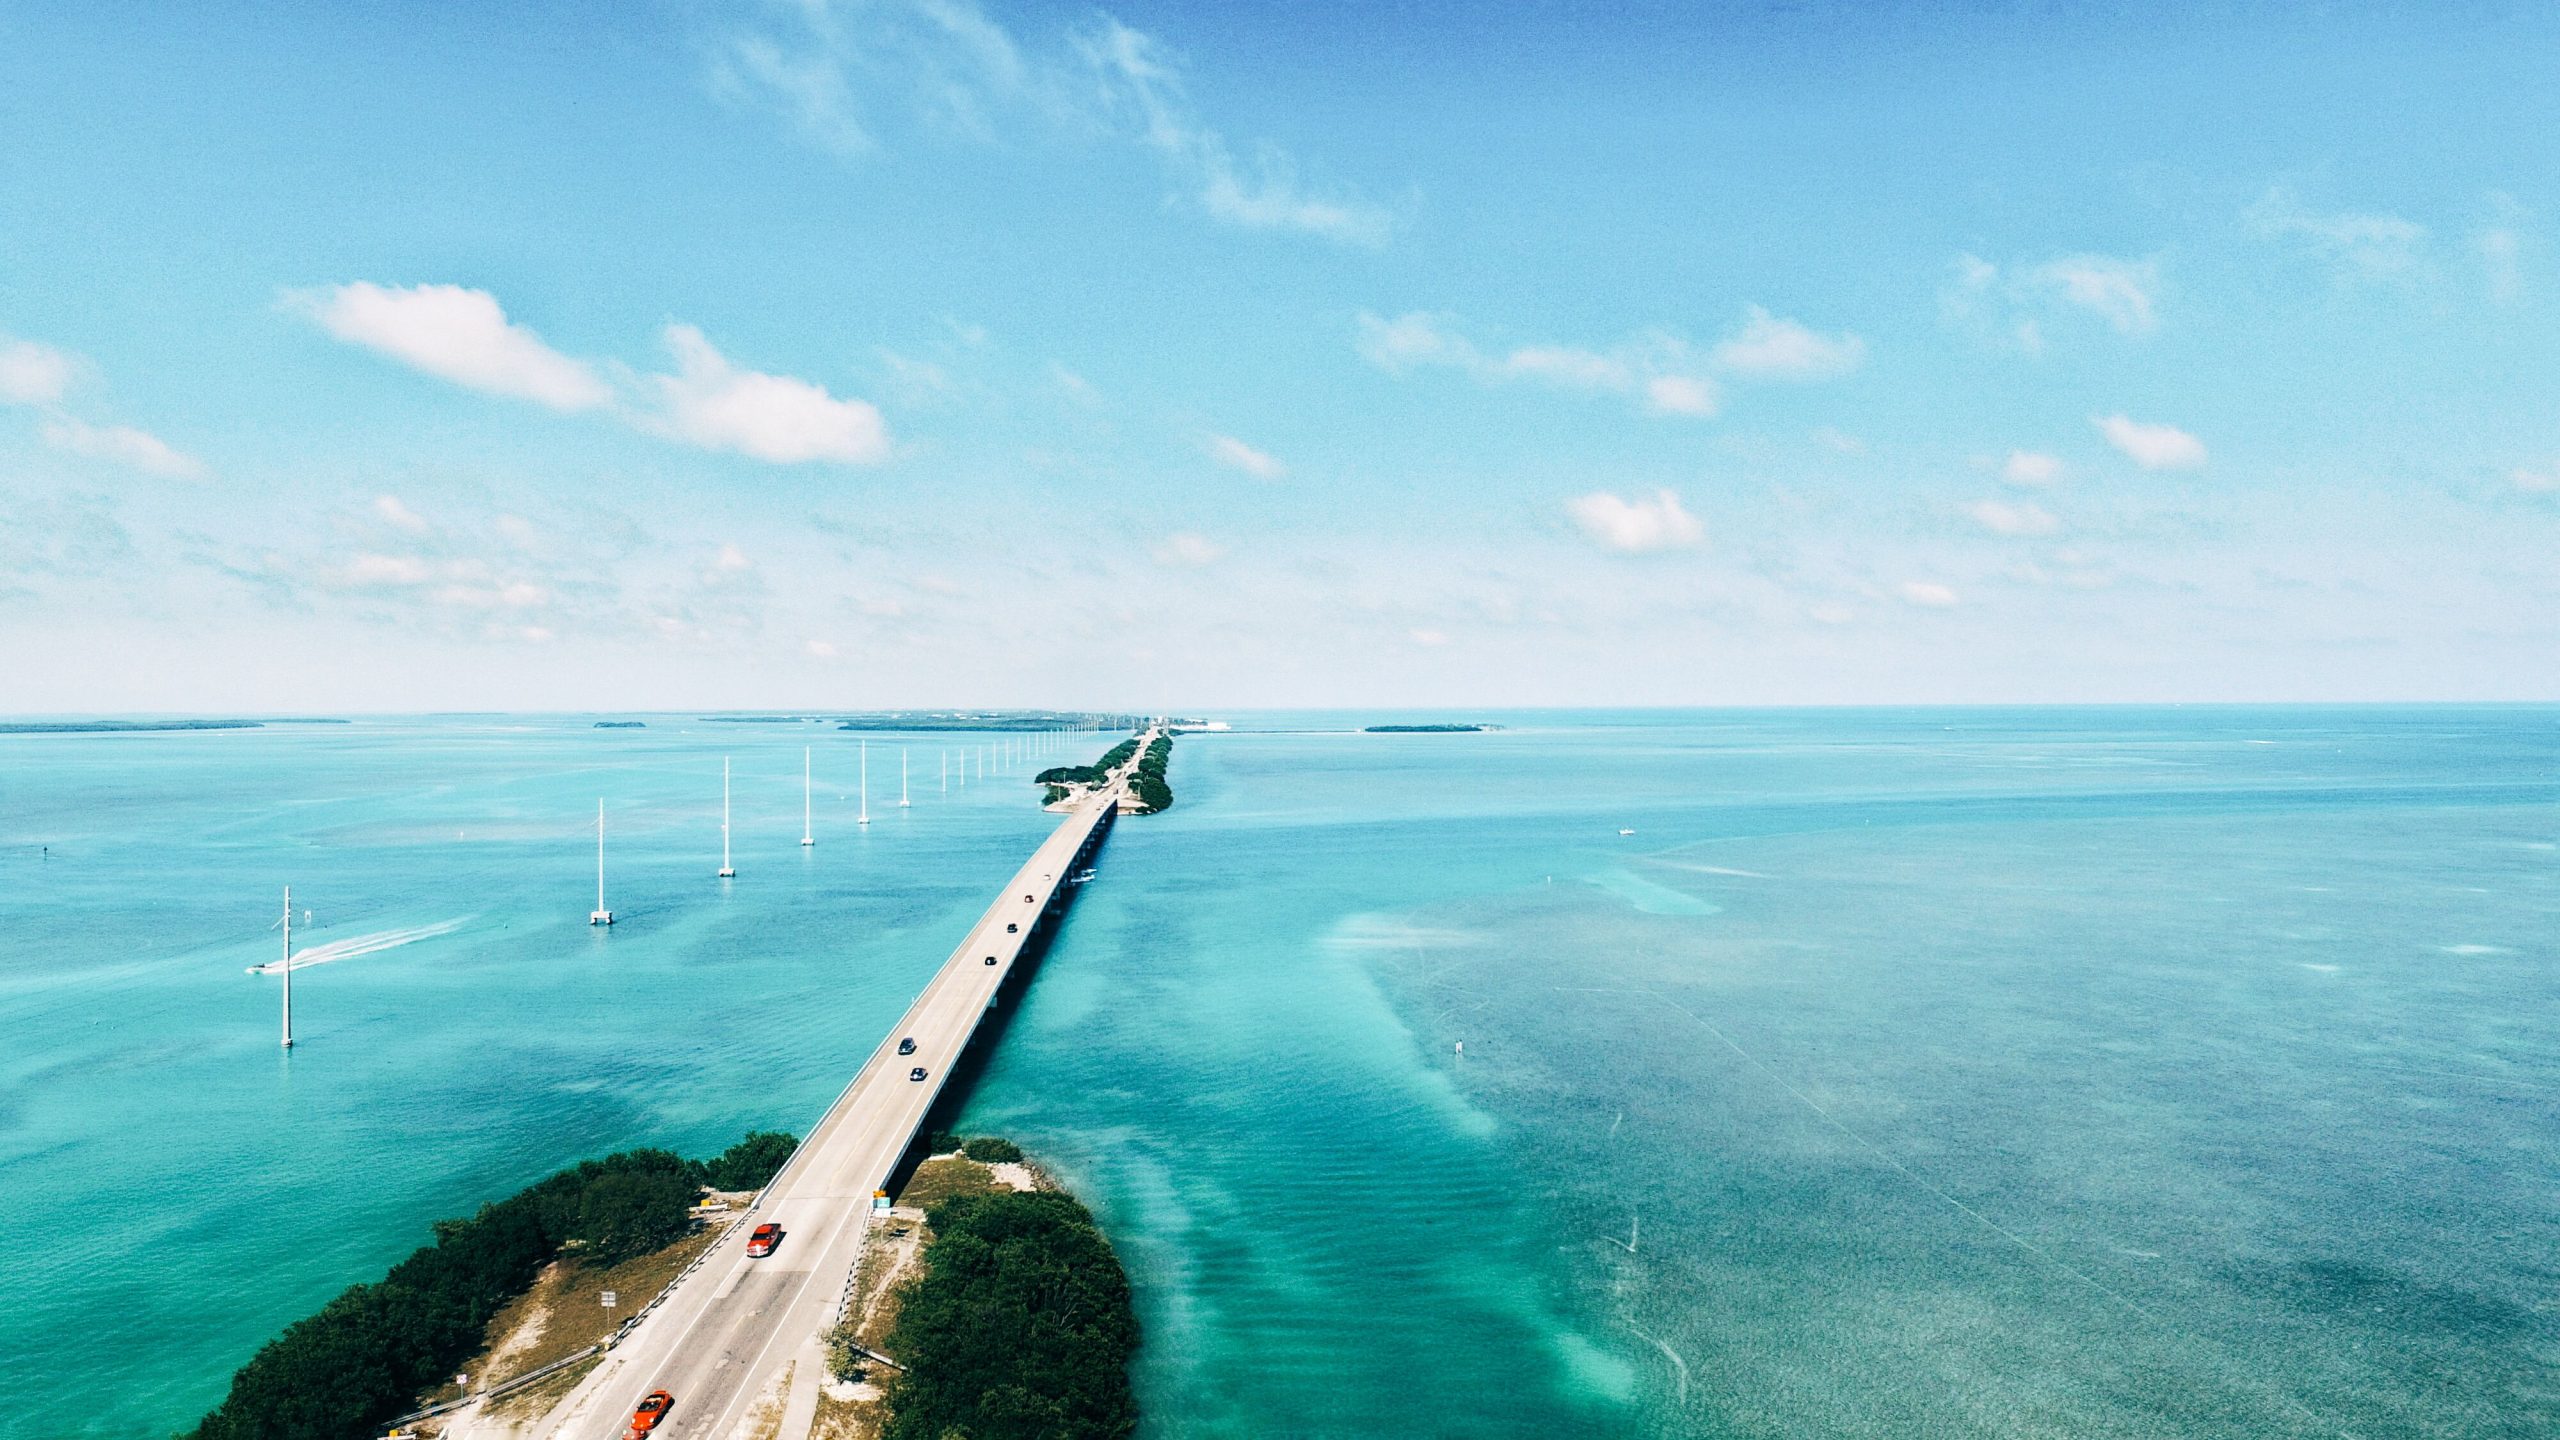 The Overseas Highway: Miami to Key West on US Highway 1